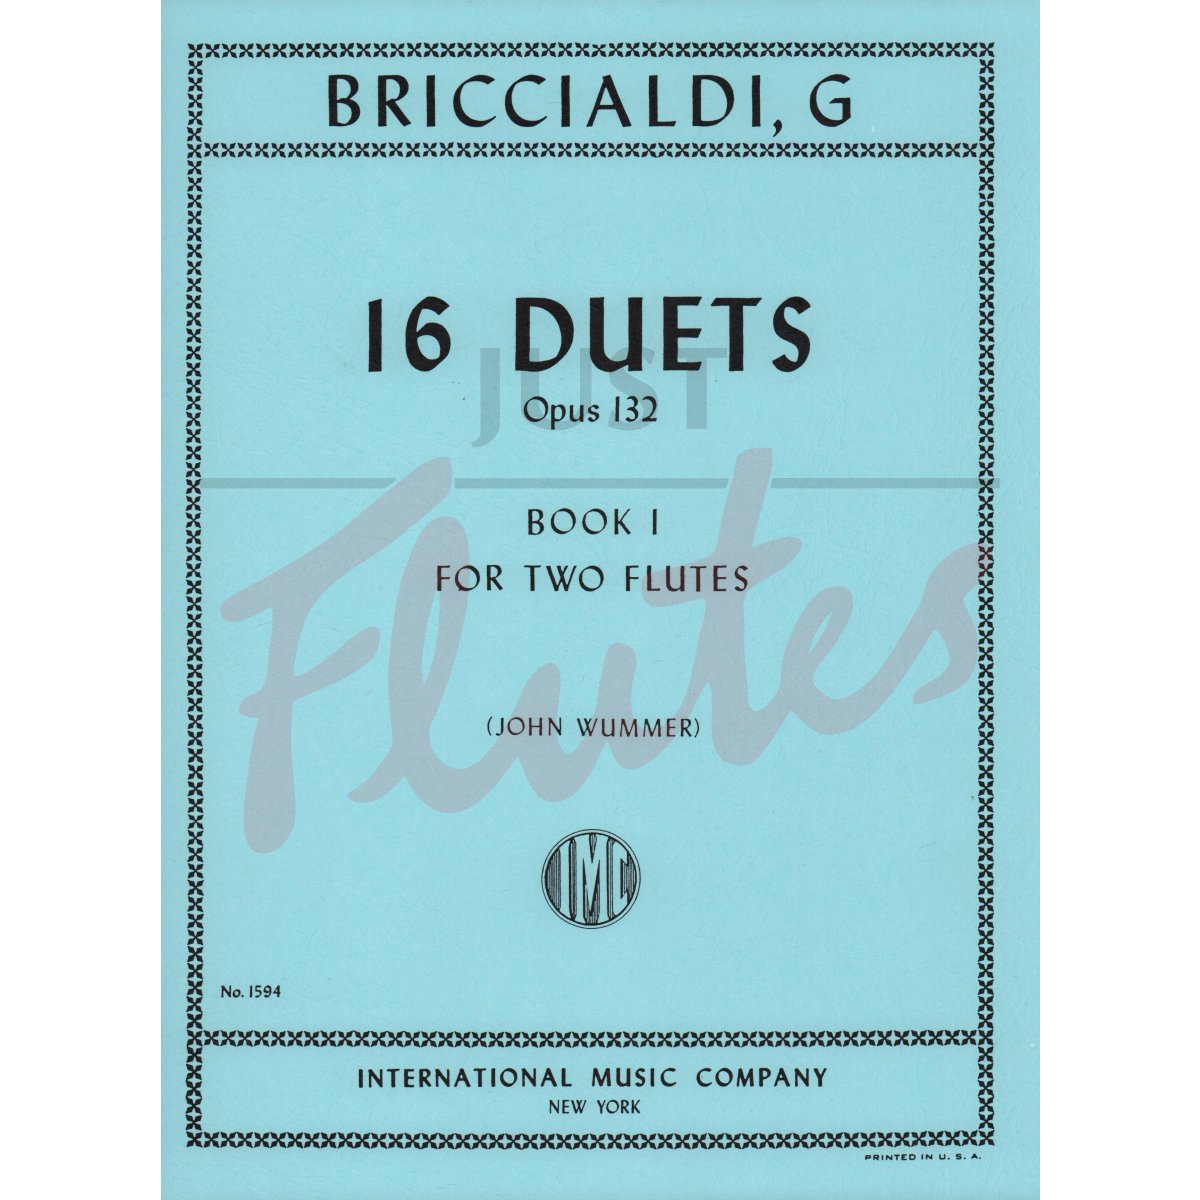 16 Duets for Two Flutes